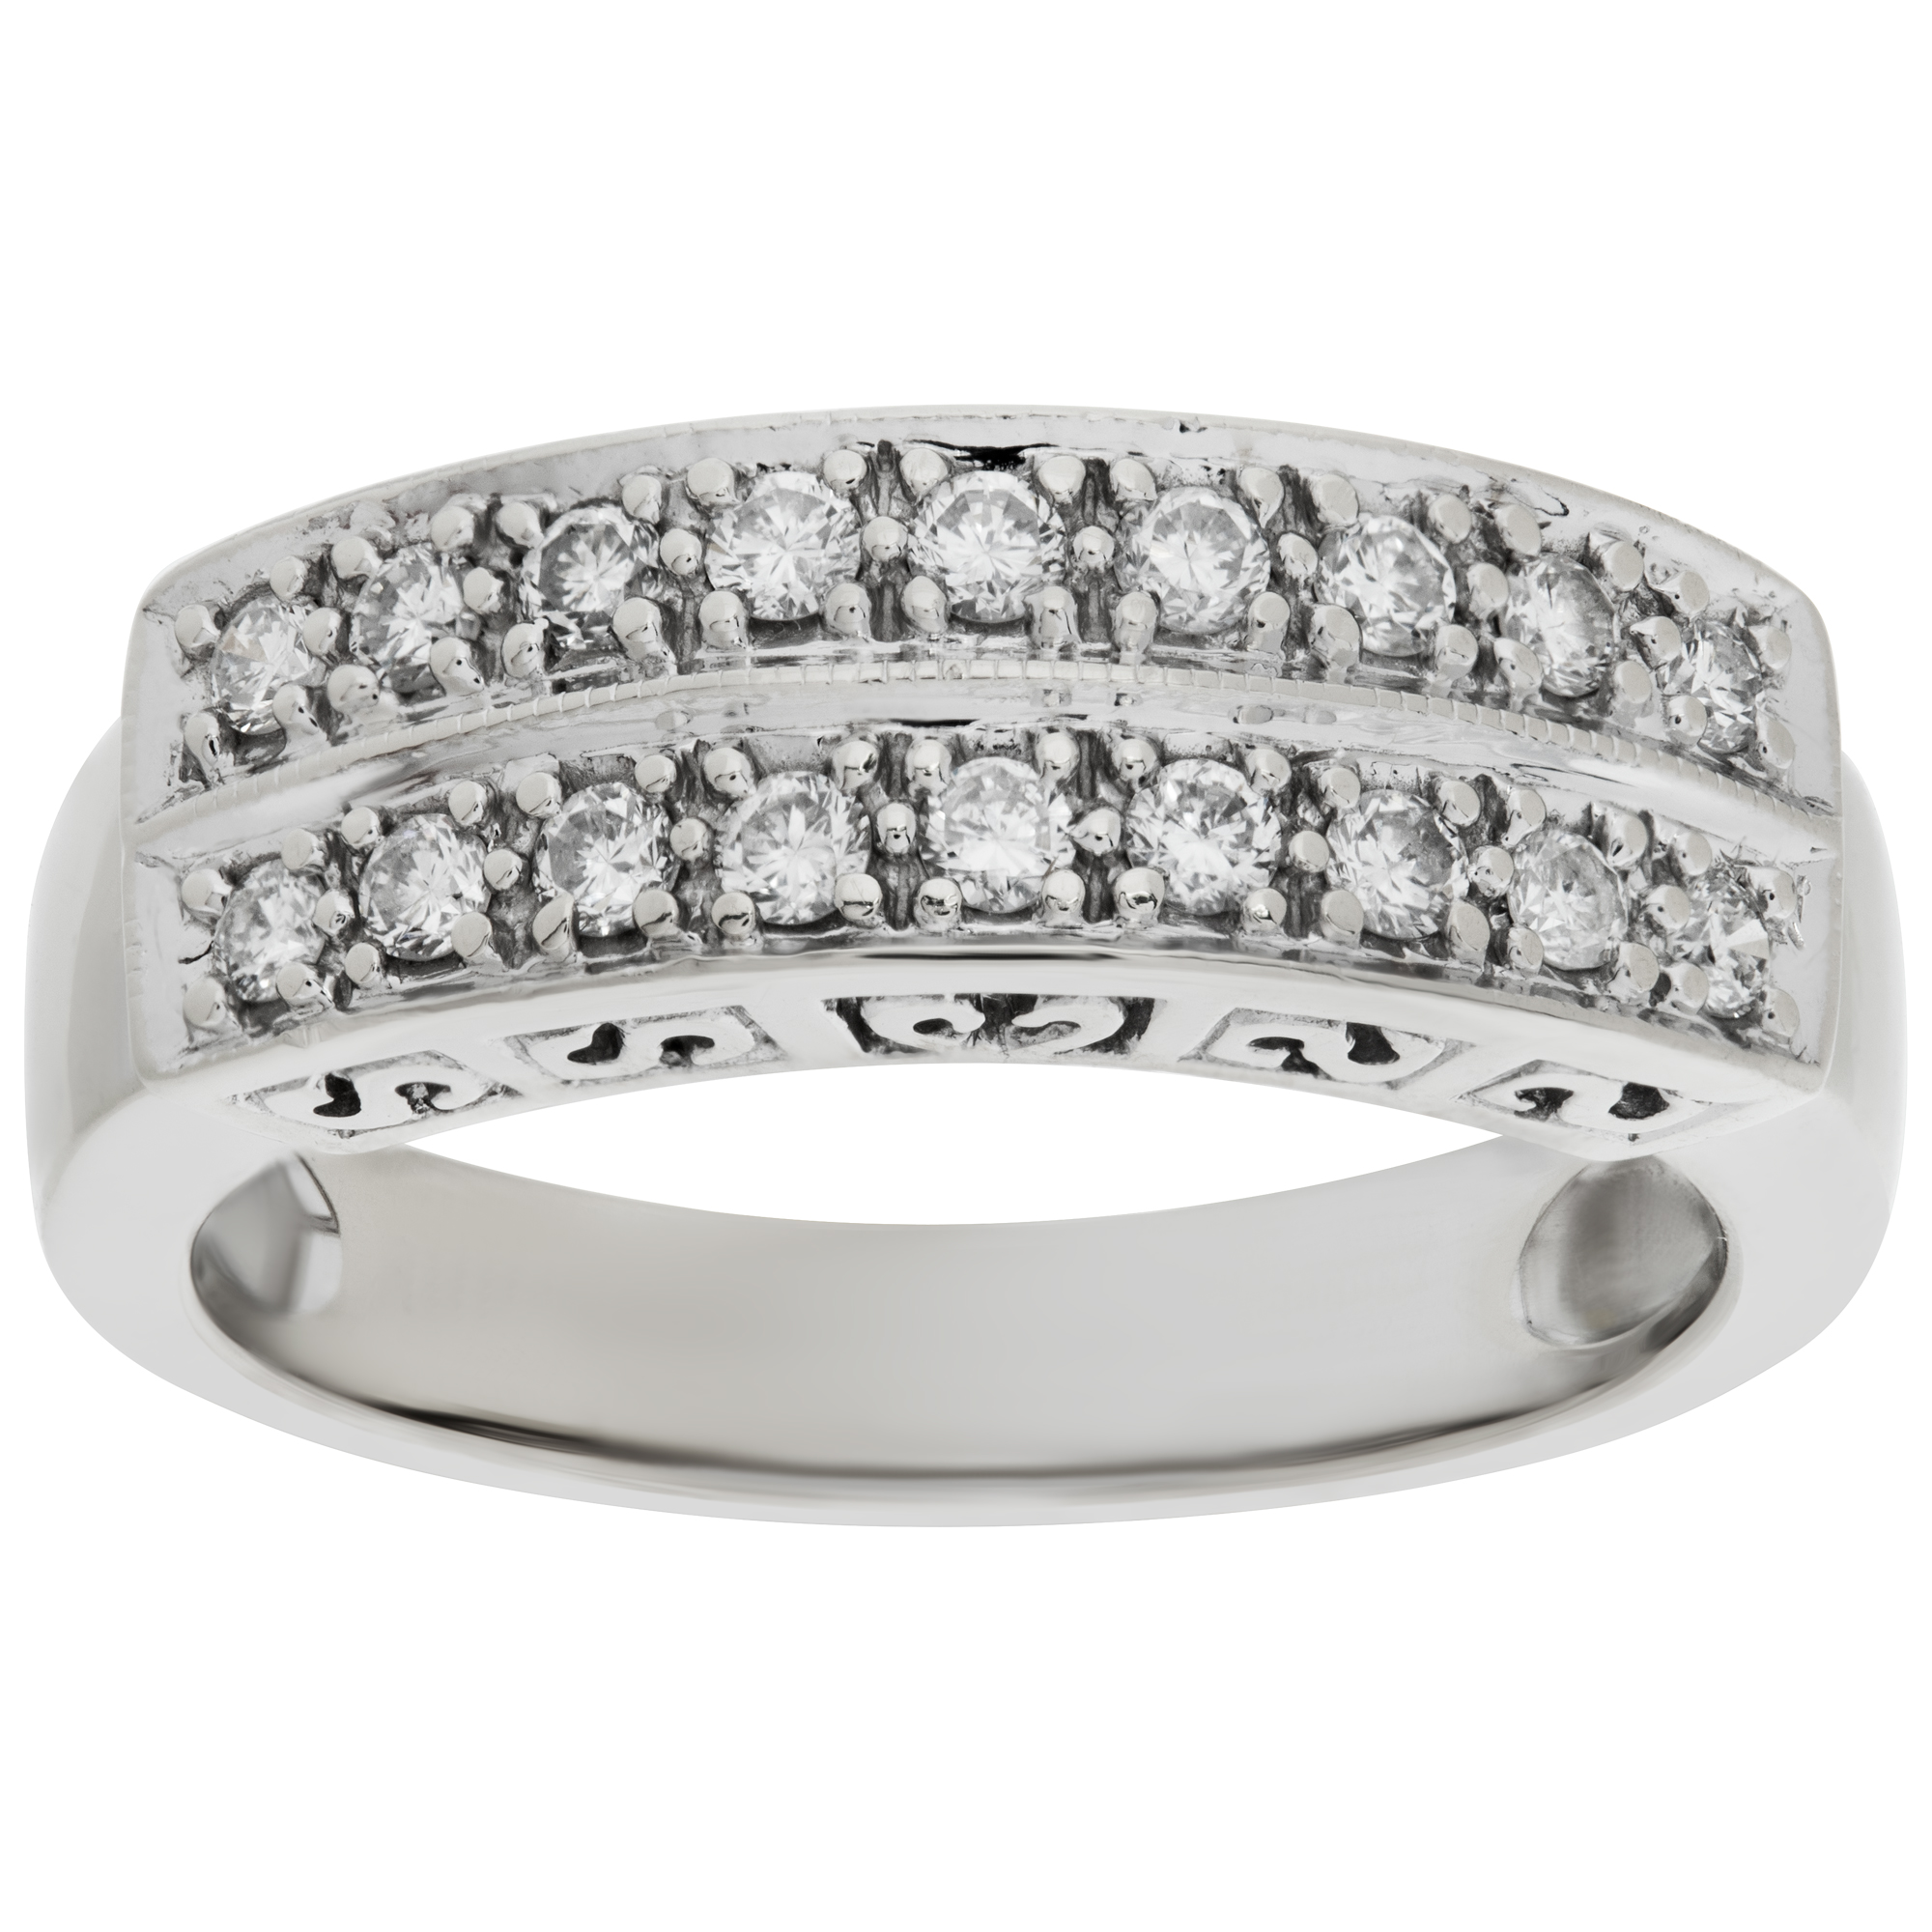 Double row diamond band in 14k white gold. 0.35 carats in diamonds; size 6 3/4 image 1